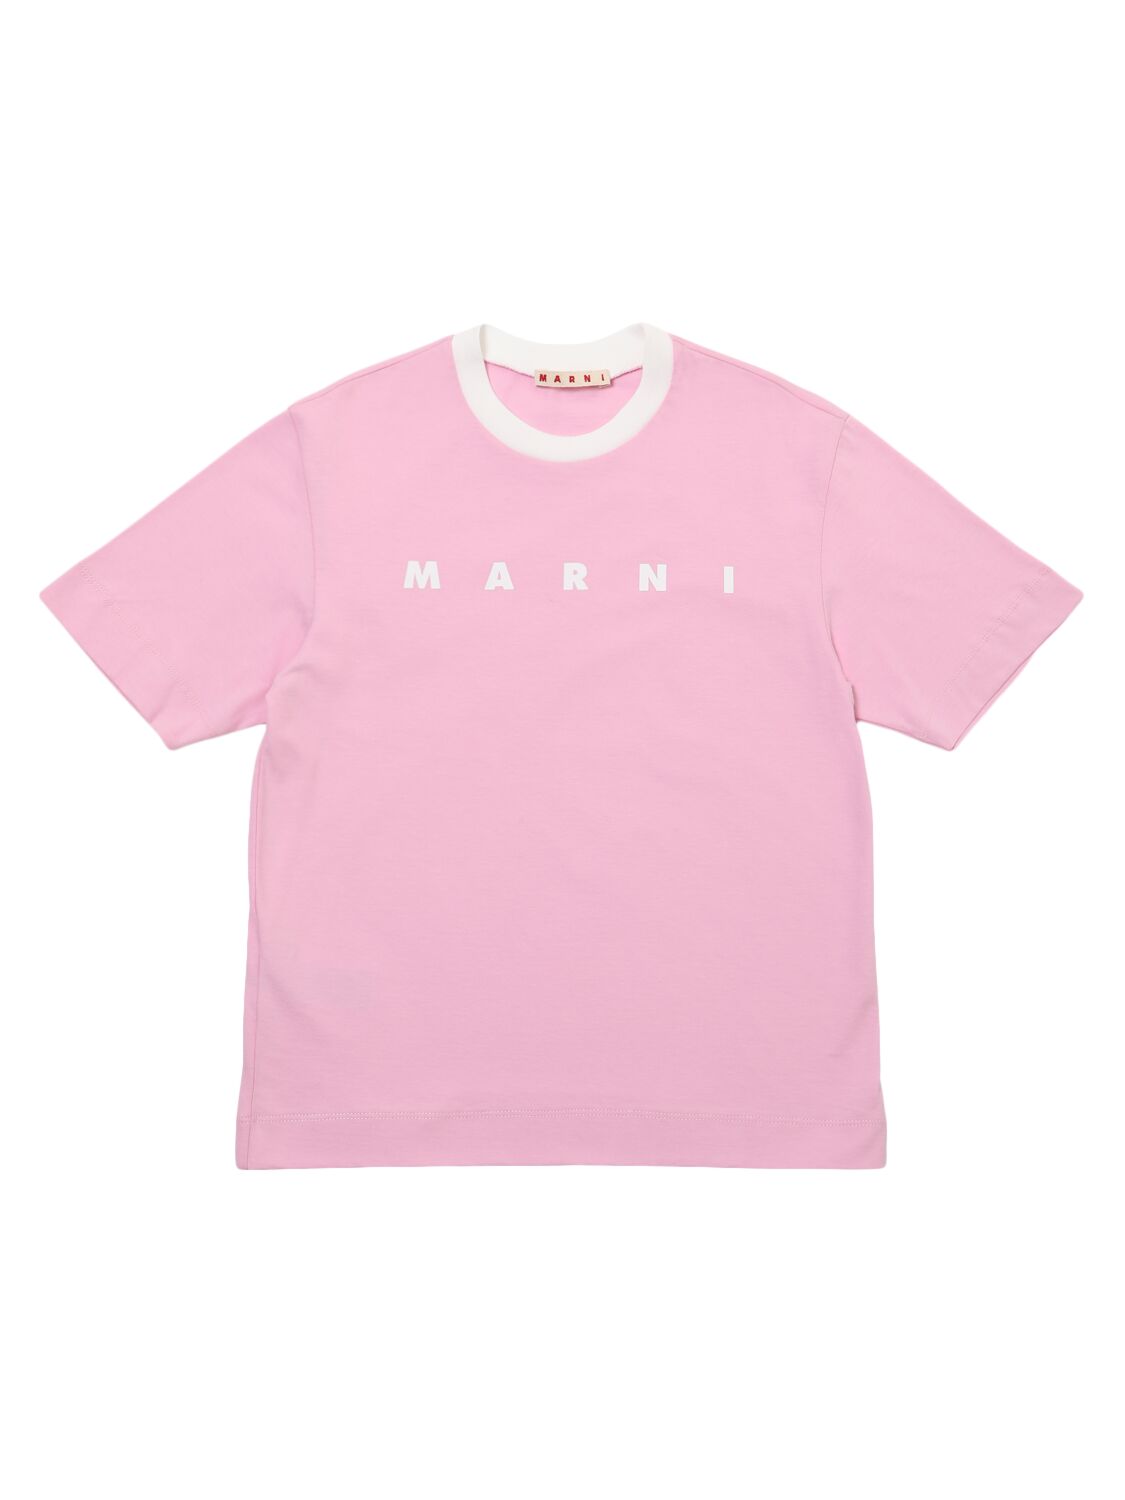 Marni Junior Embroidered Logo Cotton Jersey T-shirt In Pink